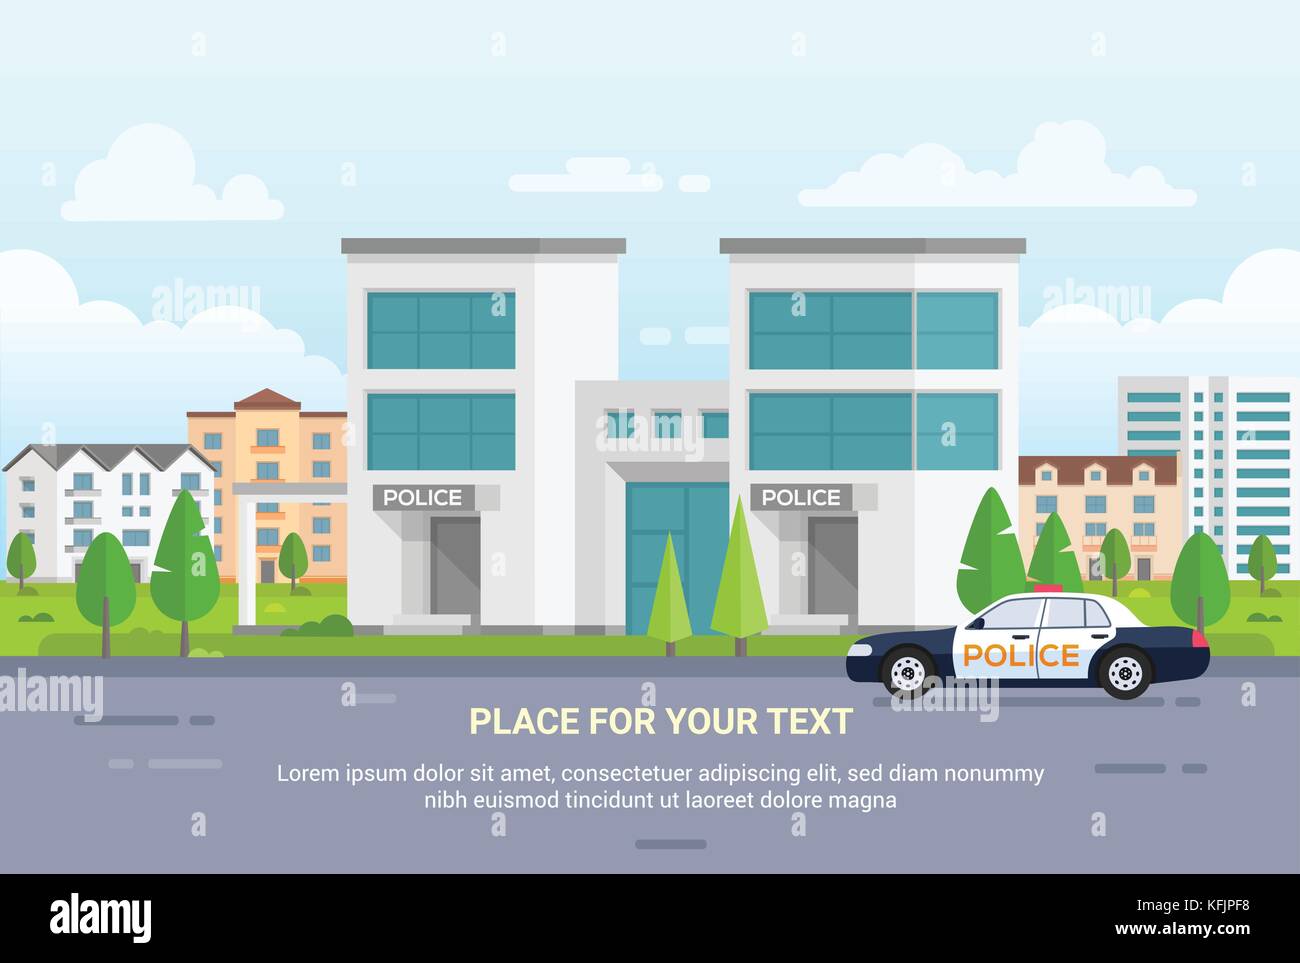 City police station with place for text - modern vector illustration Stock Vector